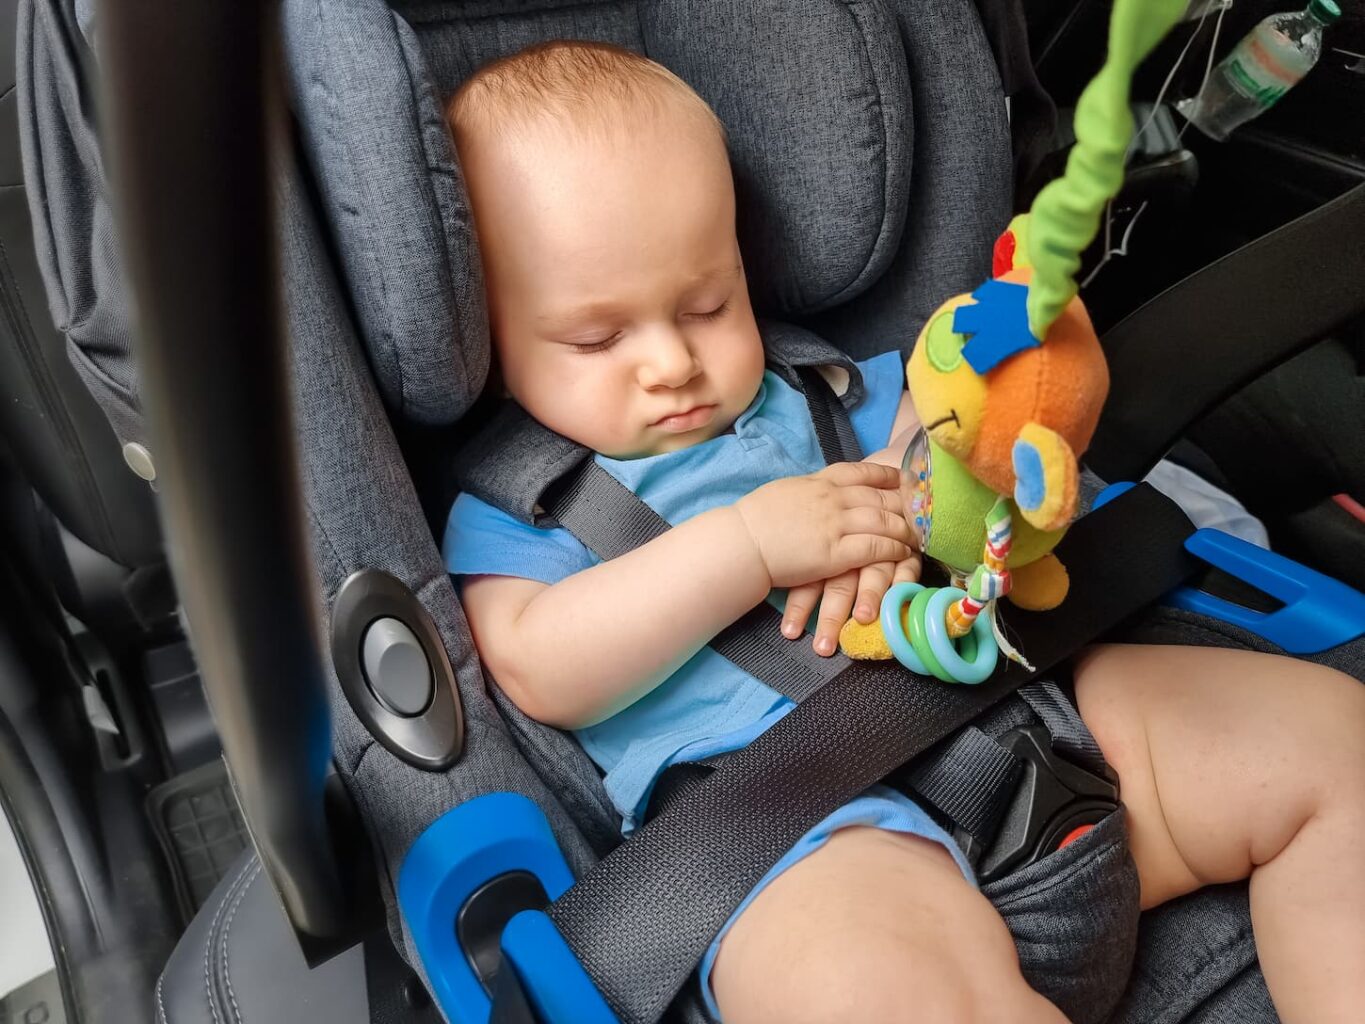 An image of a baby boy sleeping in the backseat of a car and next to his toy.